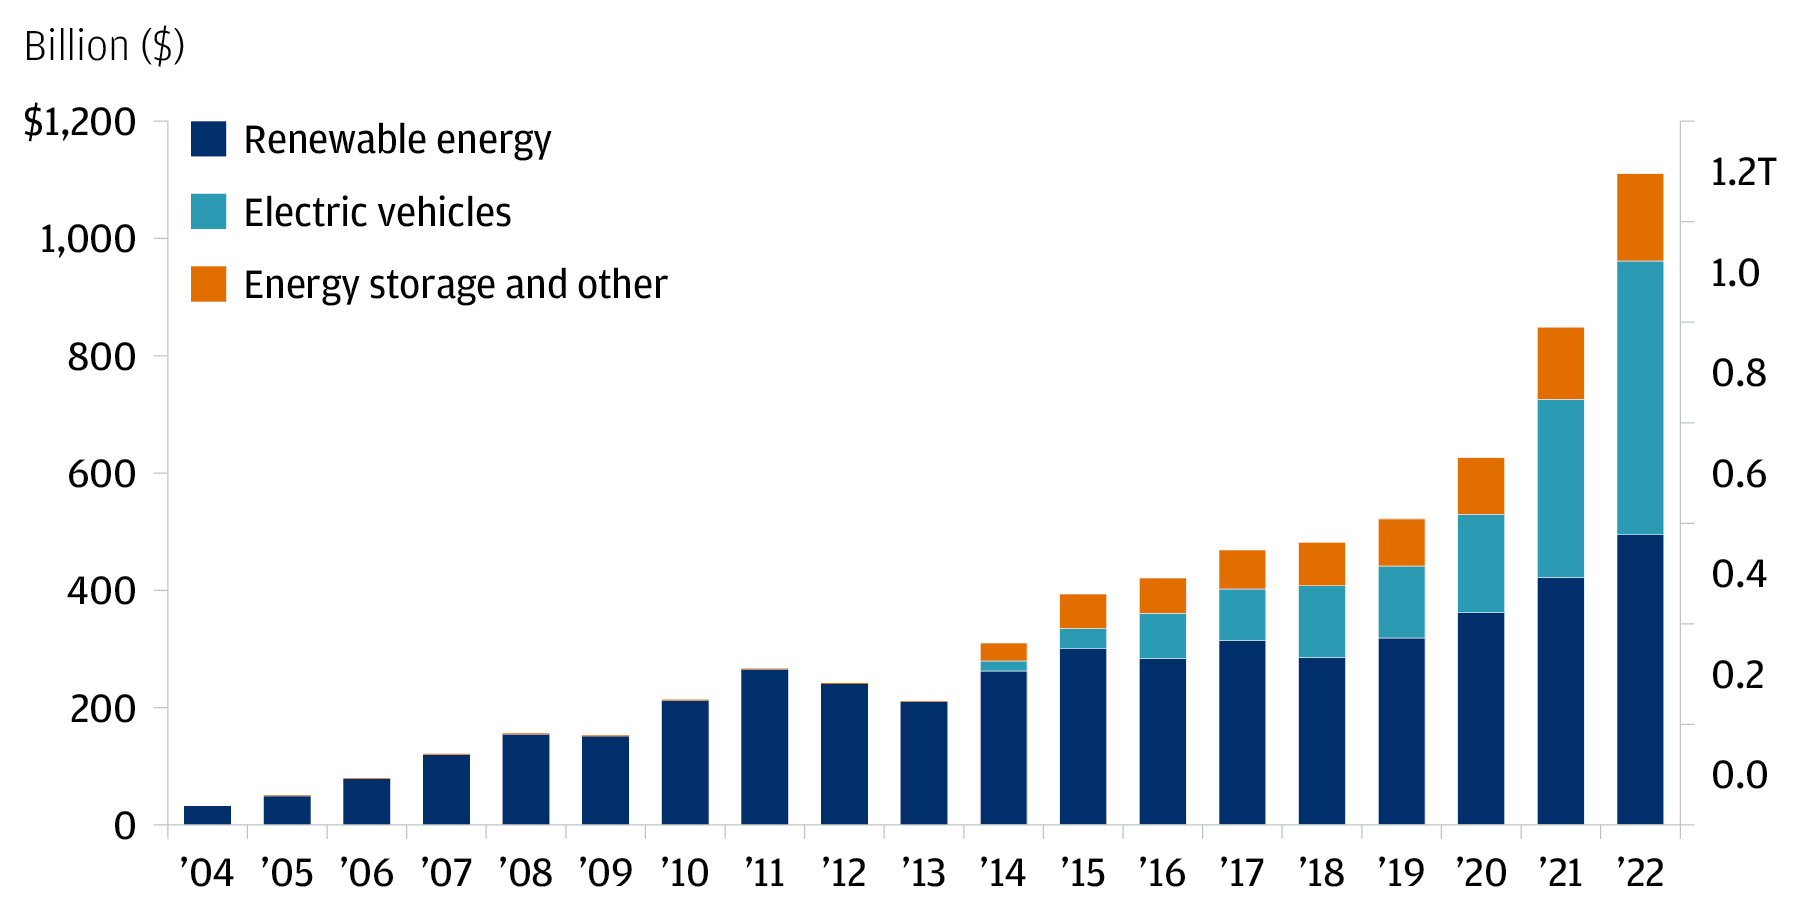 This chart shows annual global investment in energy transition projects from 2004 to 2022, broken down into three groups: renewable energy, electric vehicles, and energy storage and other.